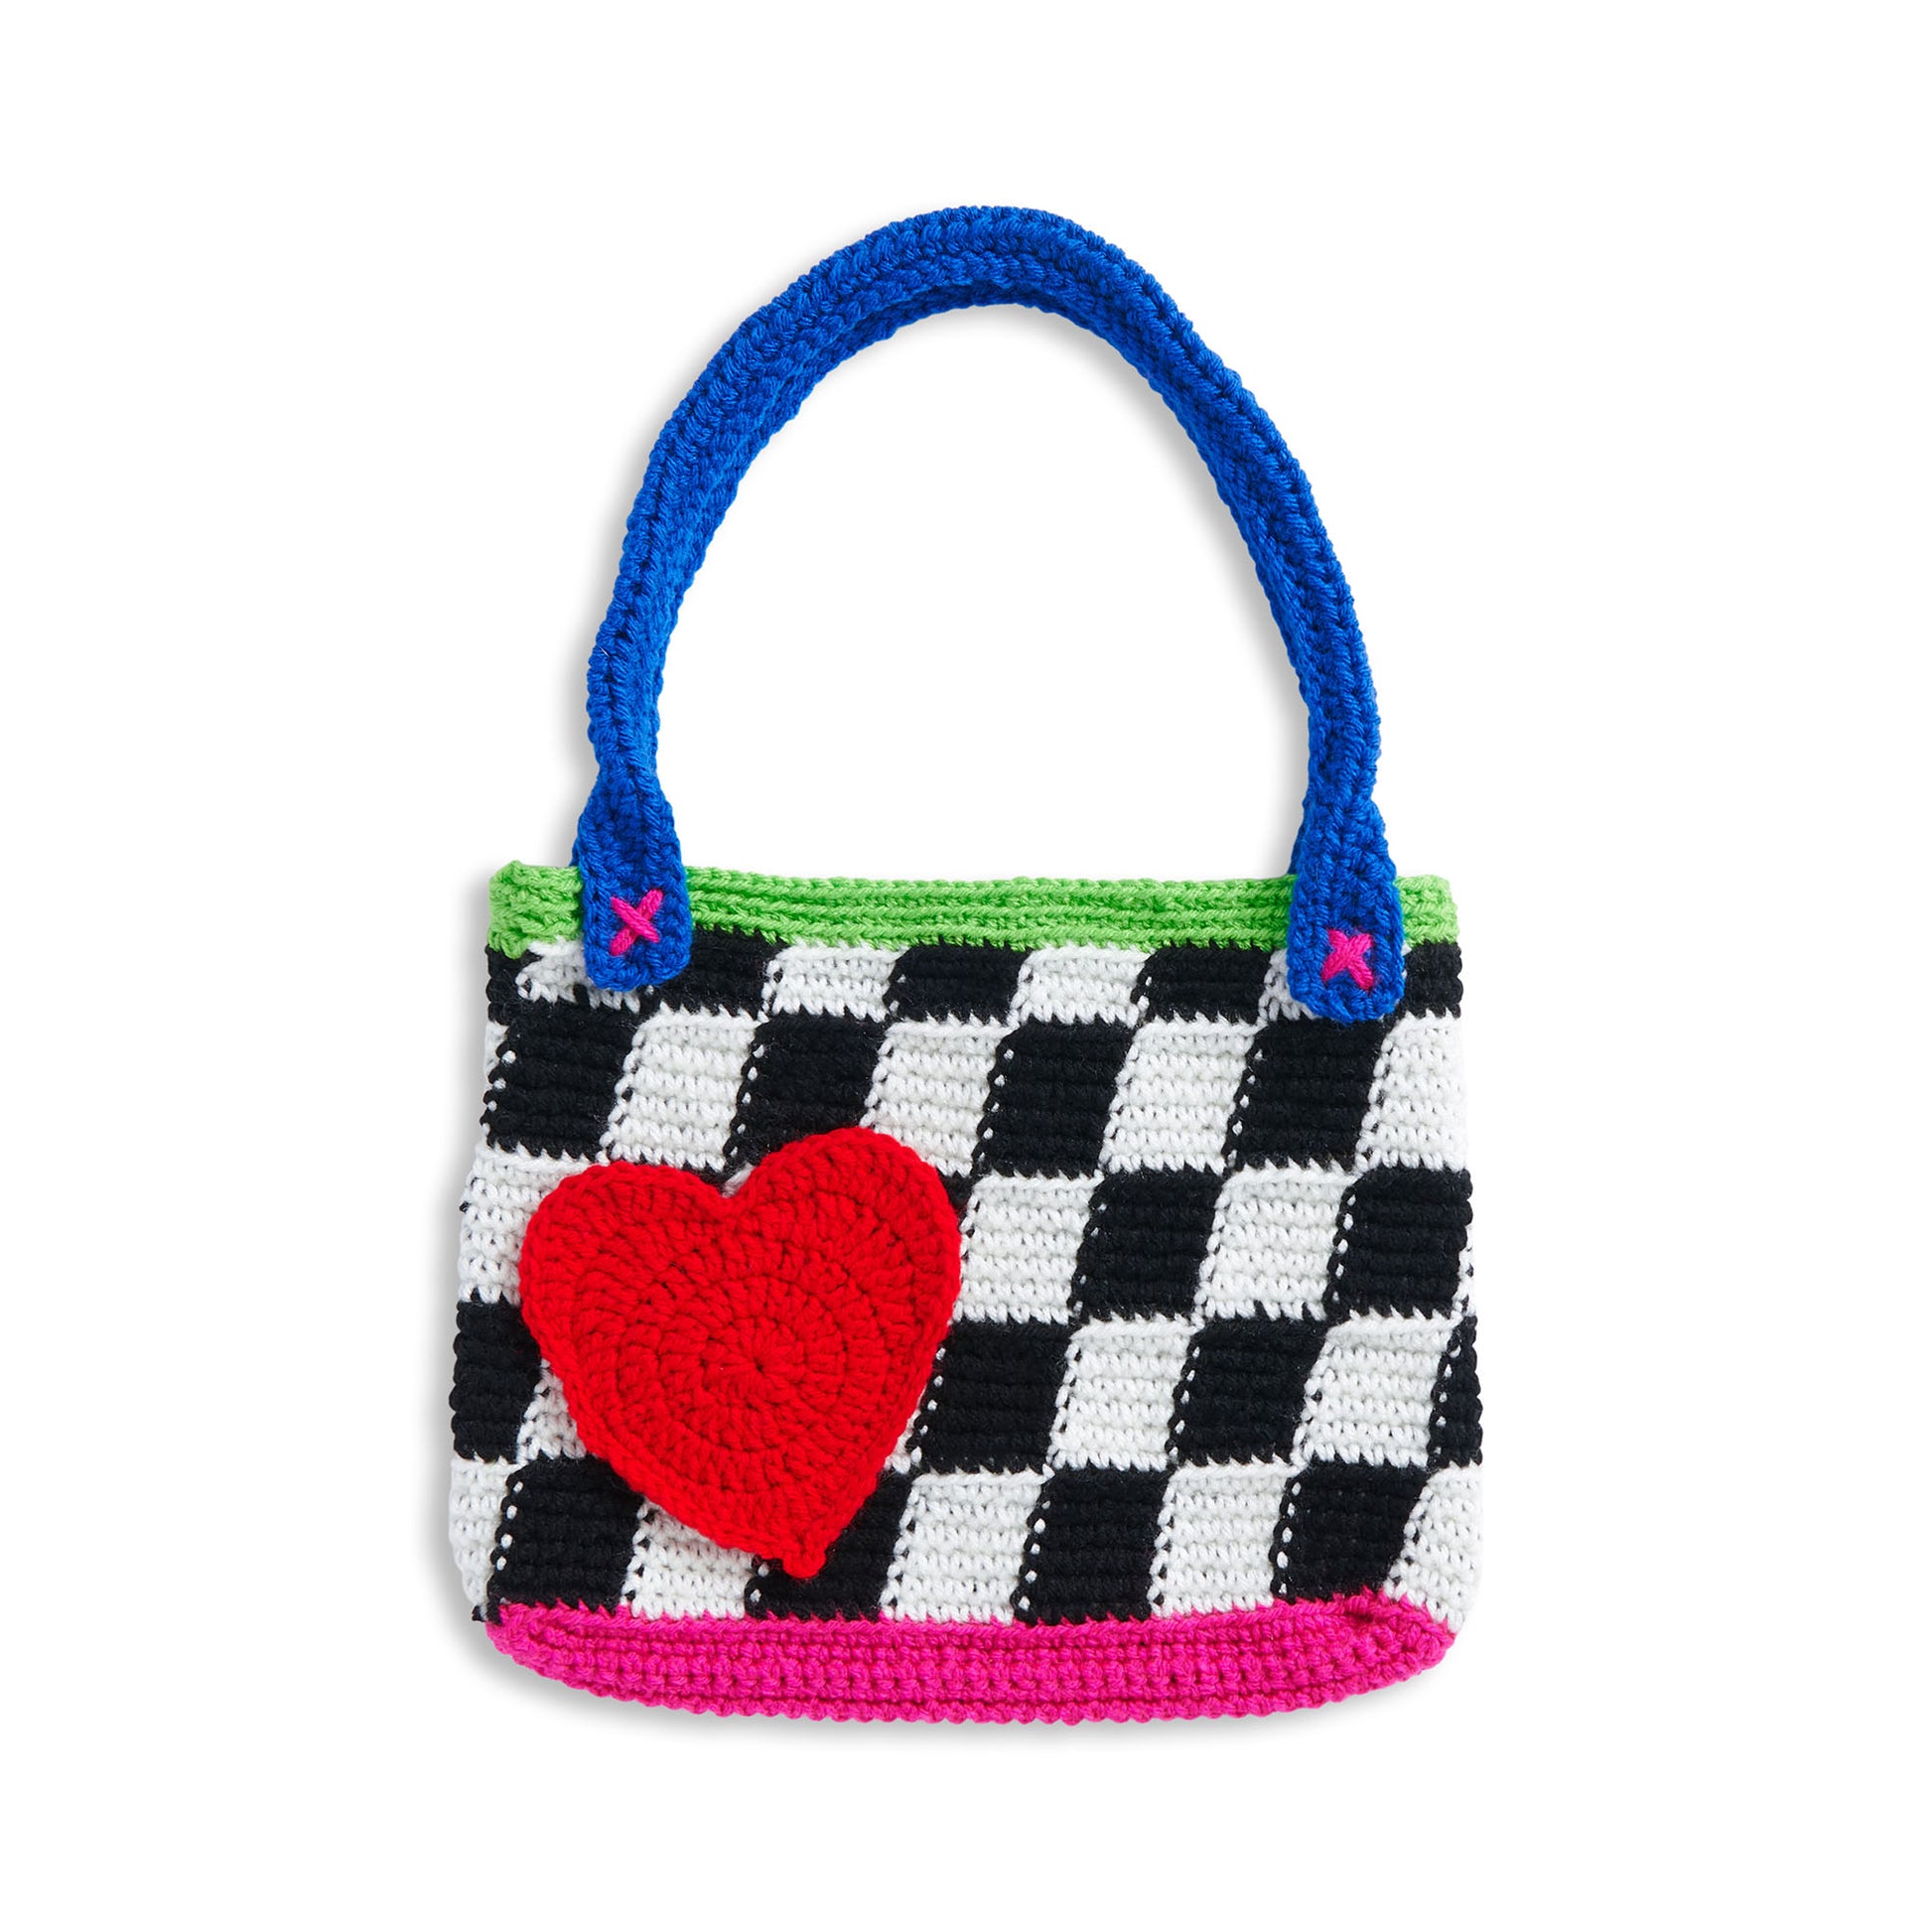 Free Red Heart Fun To Make Crochet Checkered Tote Pattern